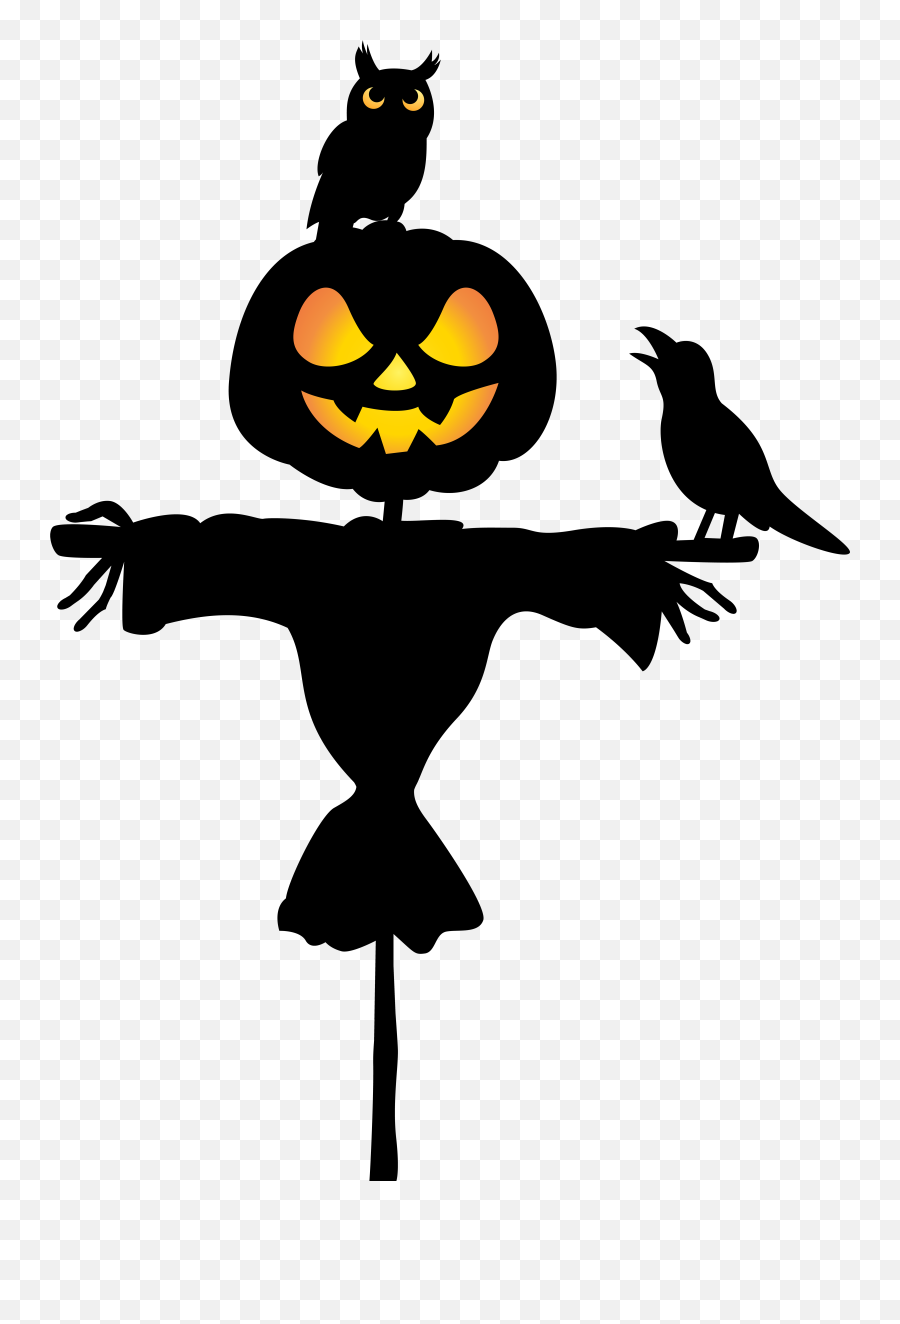 Halloween Scarecrow Png 6 - Halloween Scarecrow Png,Scarecrow Png